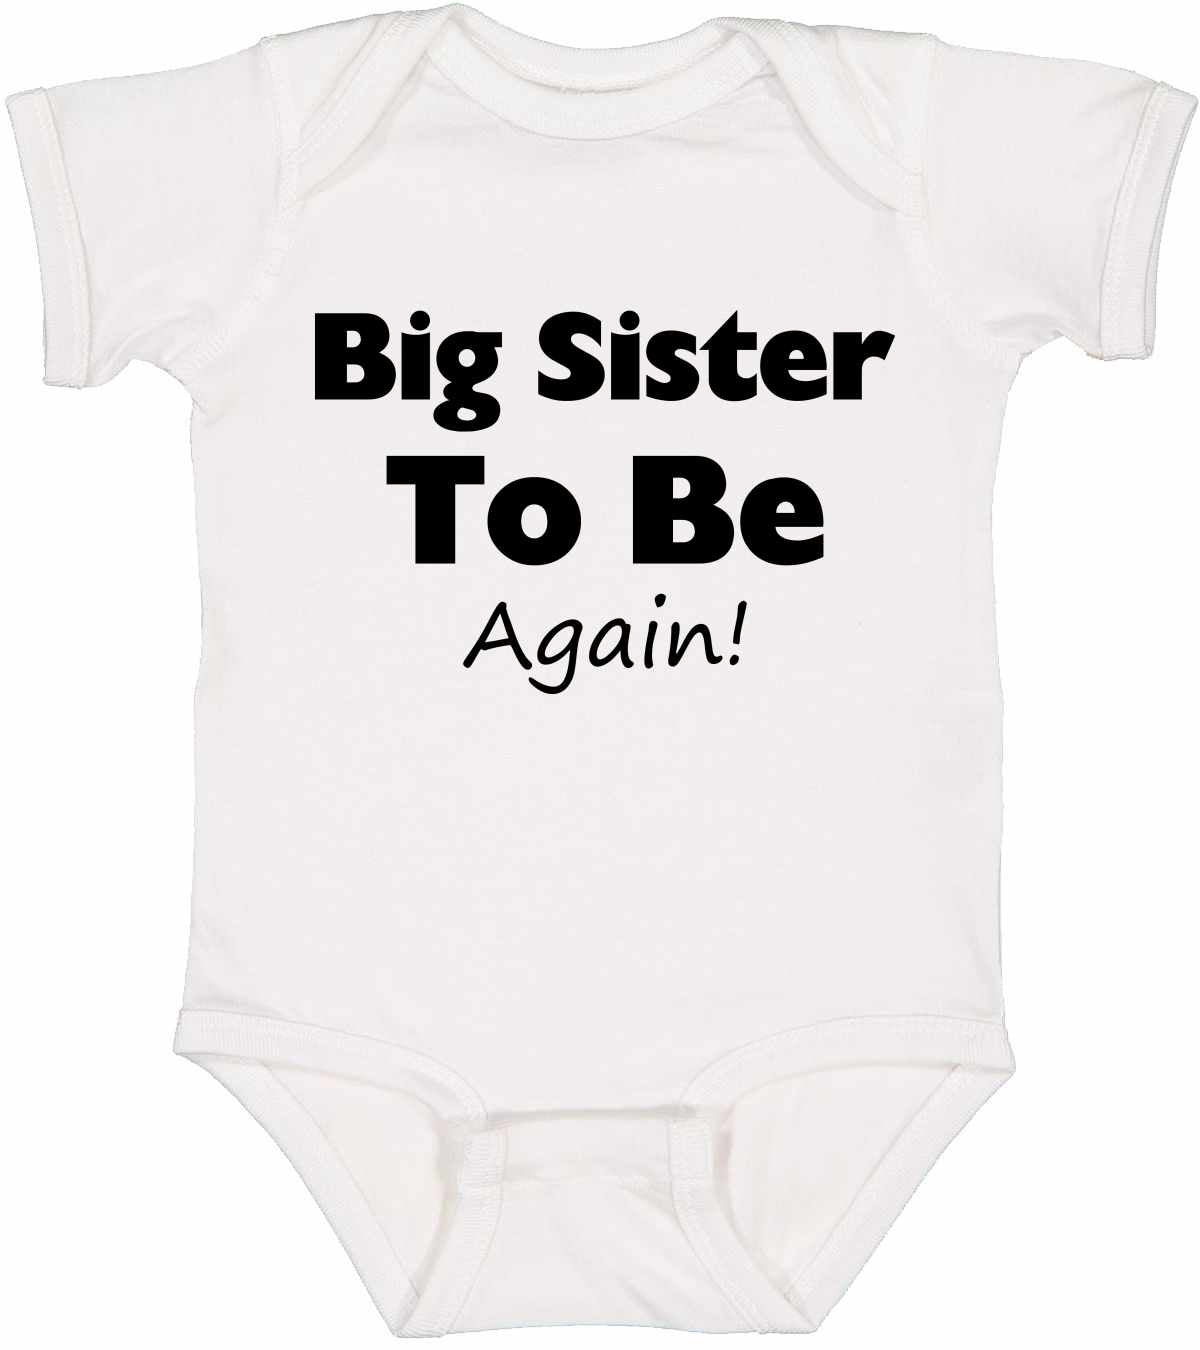 Big Sister To Be Again on Infant BodySuit (#877-10)